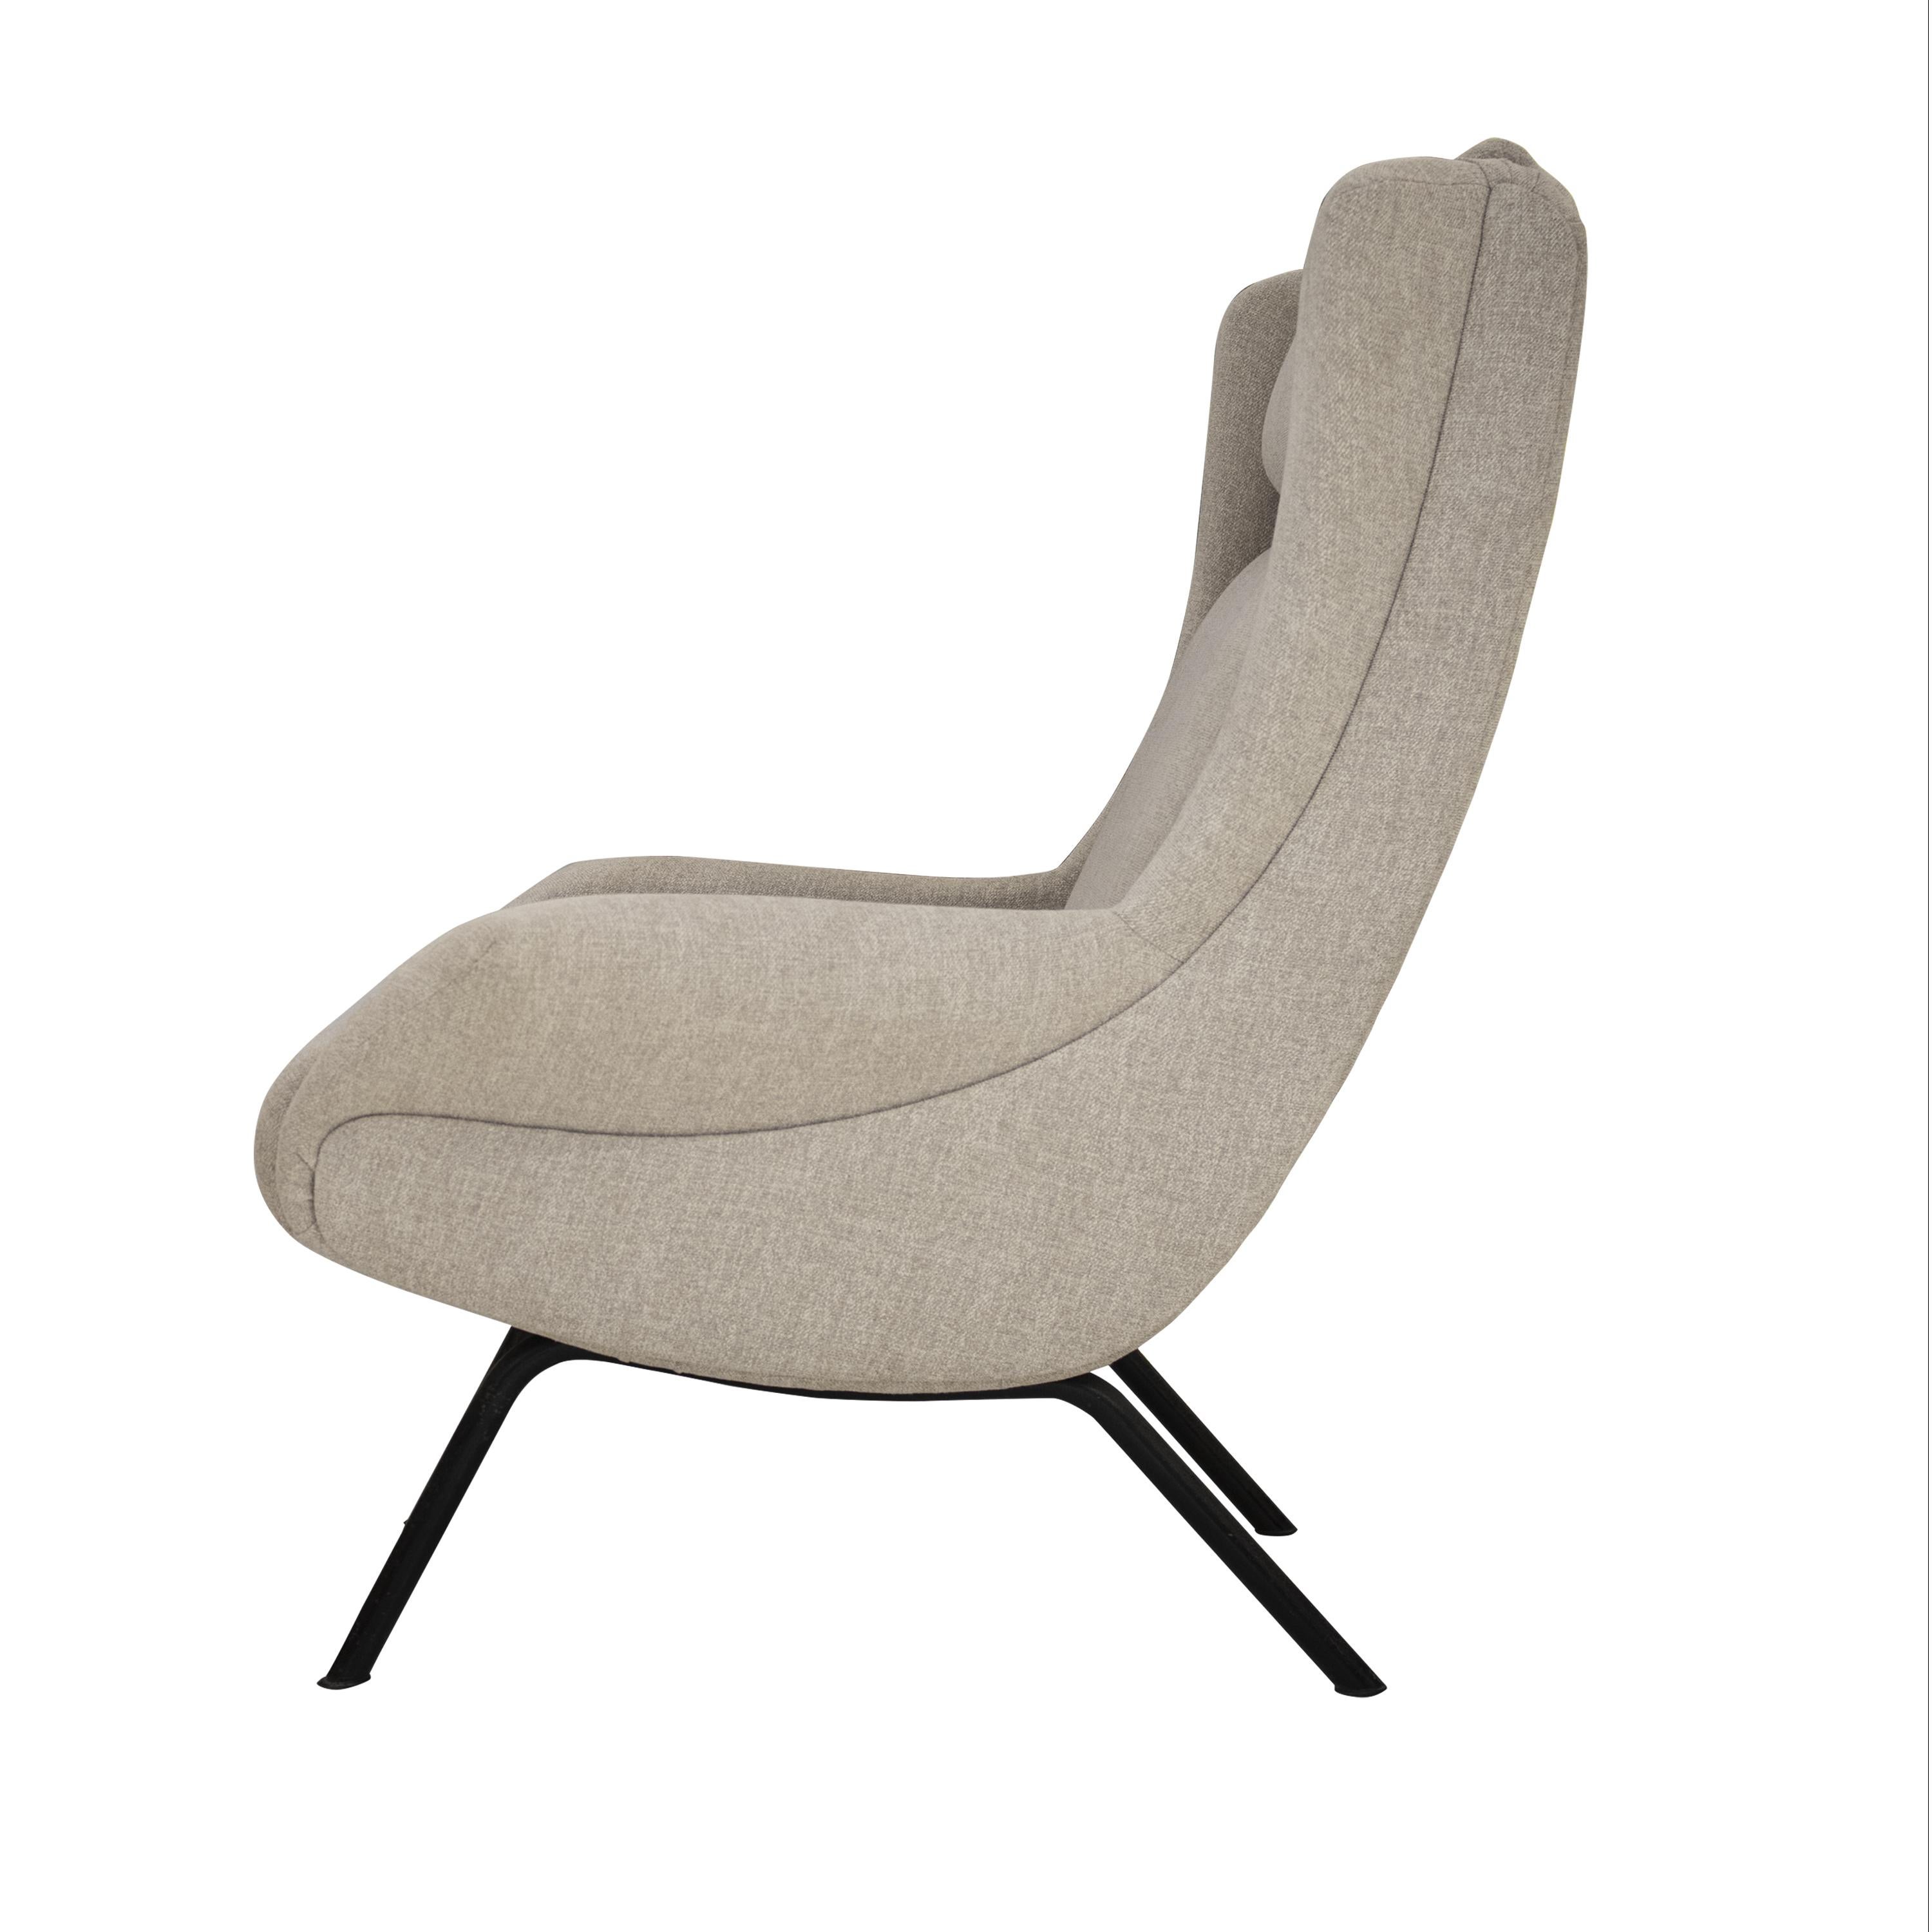 Italian Modern Armchair in the Style of Marco Zanuso, Senior Mod, Italy 1960 For Sale